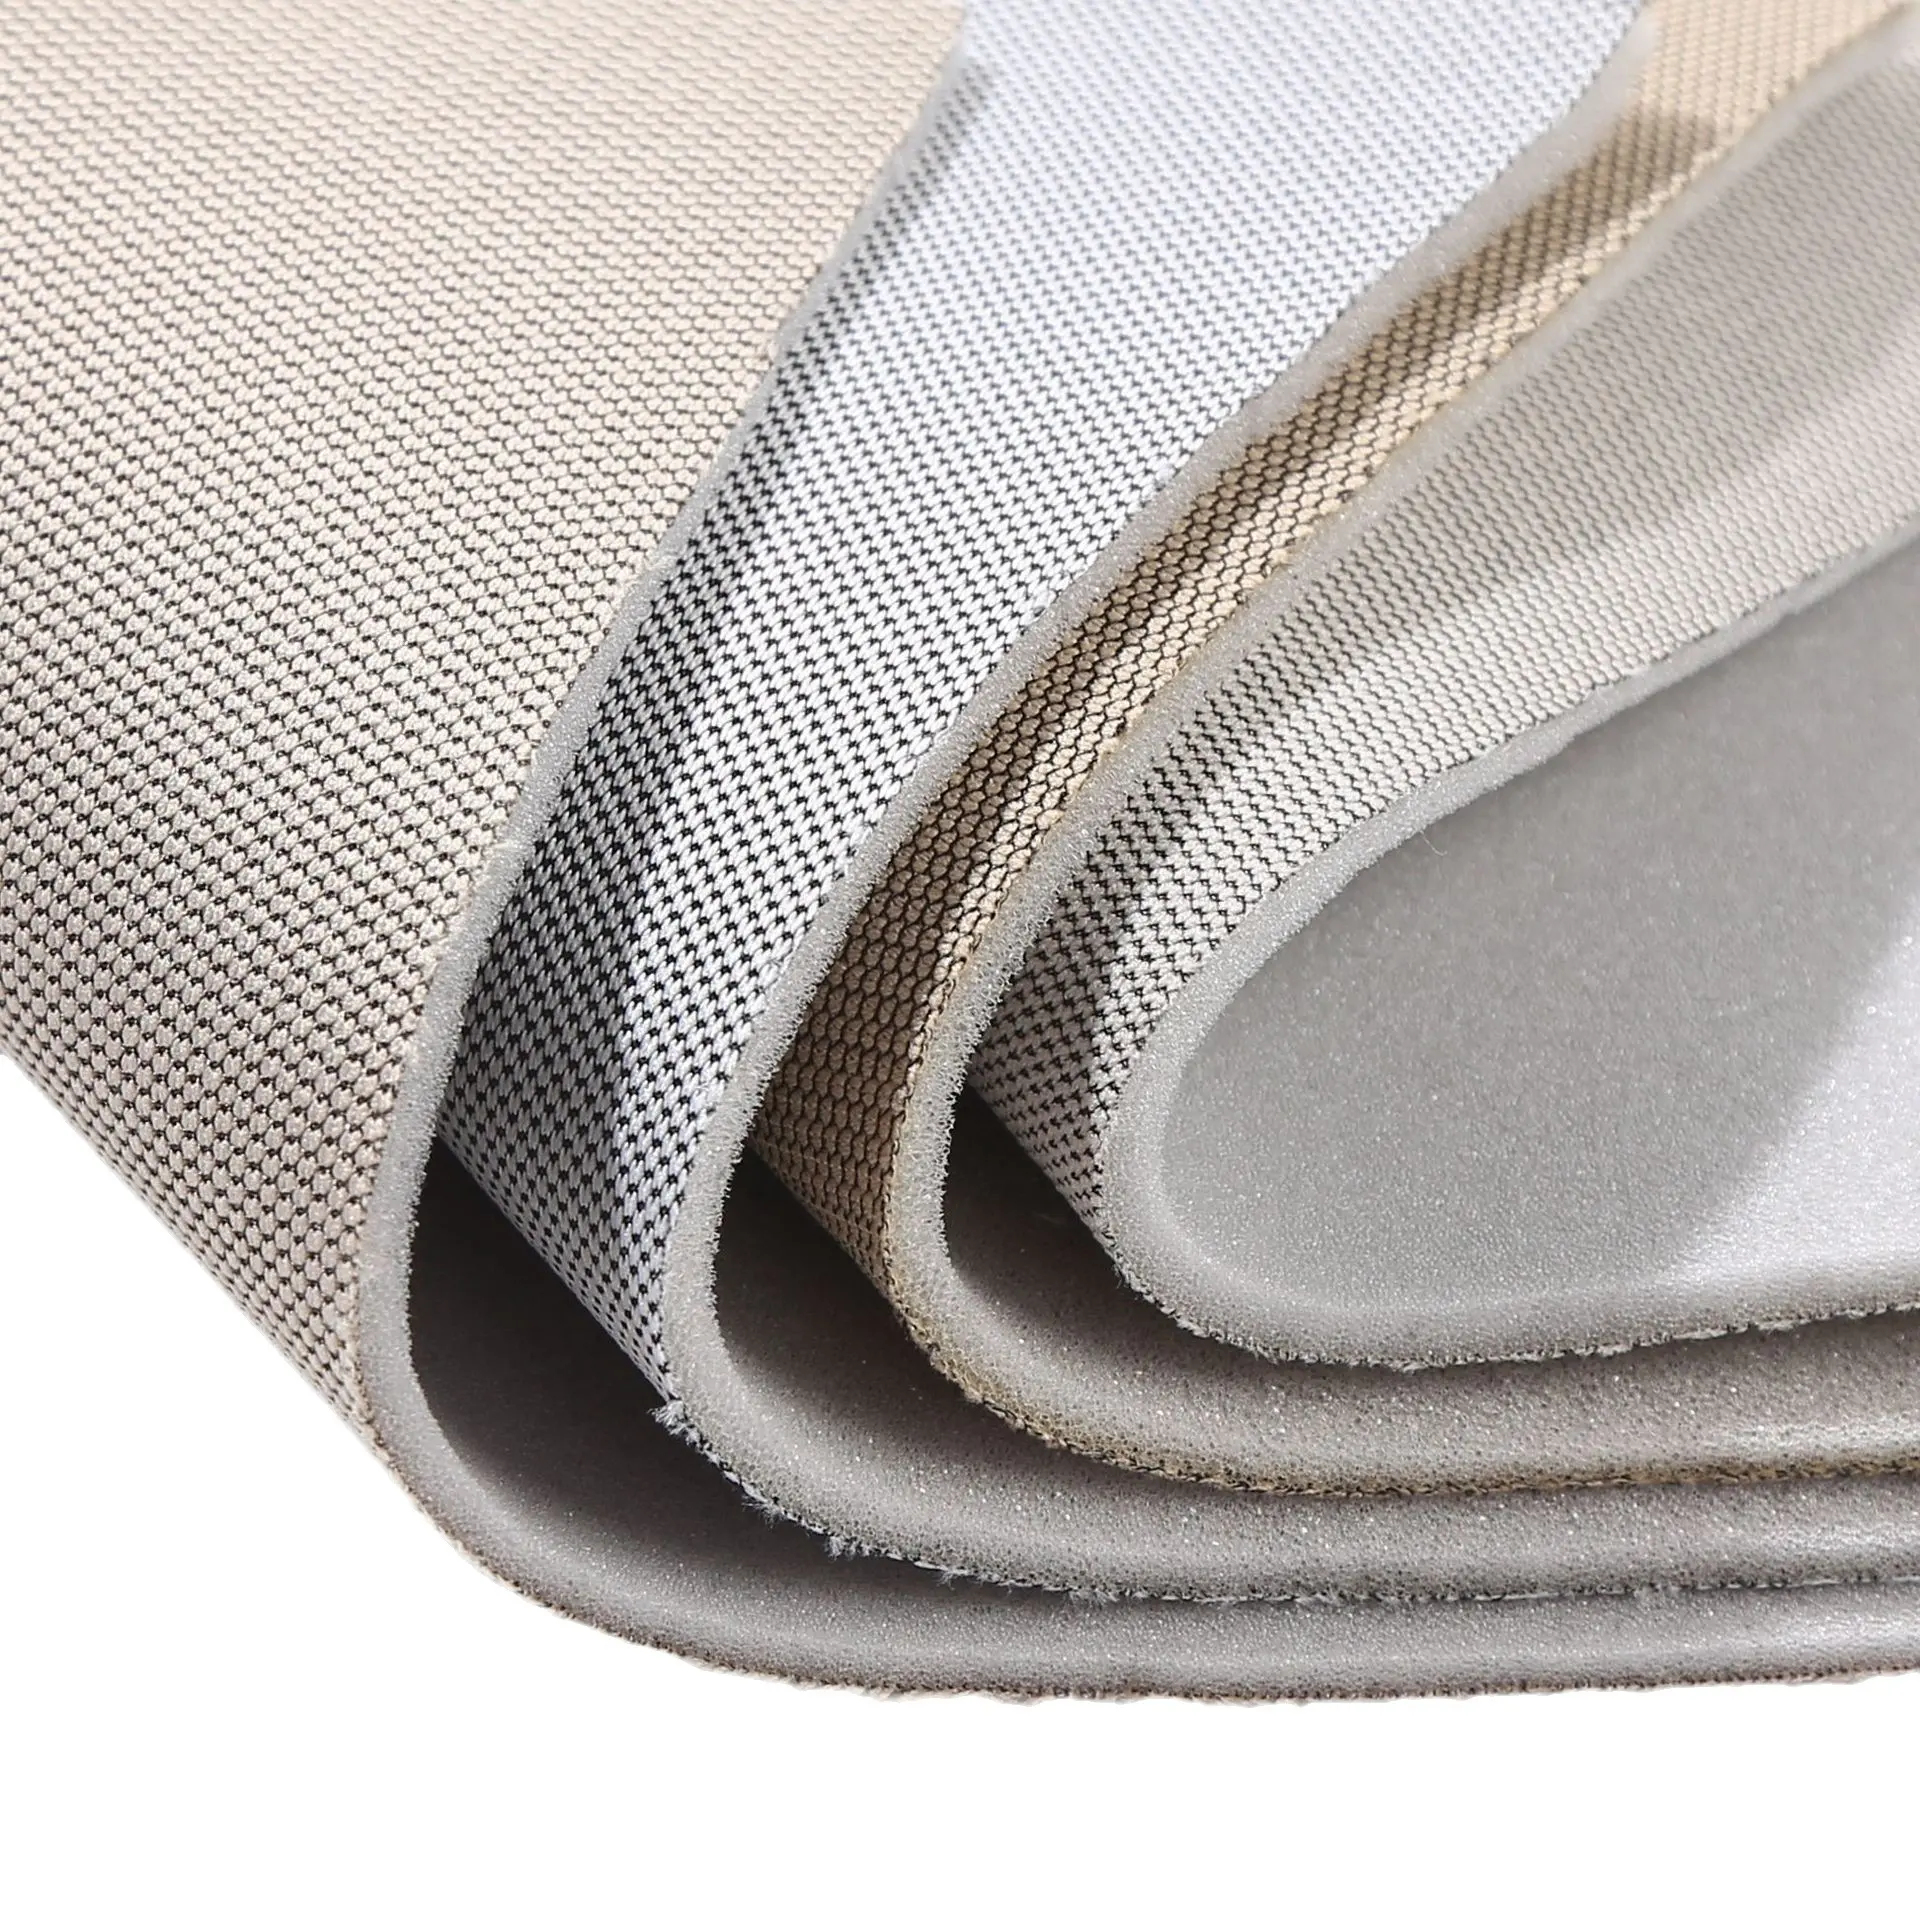 Car fabric roof fabric with flame retardant sponge car interior fabric plain knit 100% polyester car upholstery